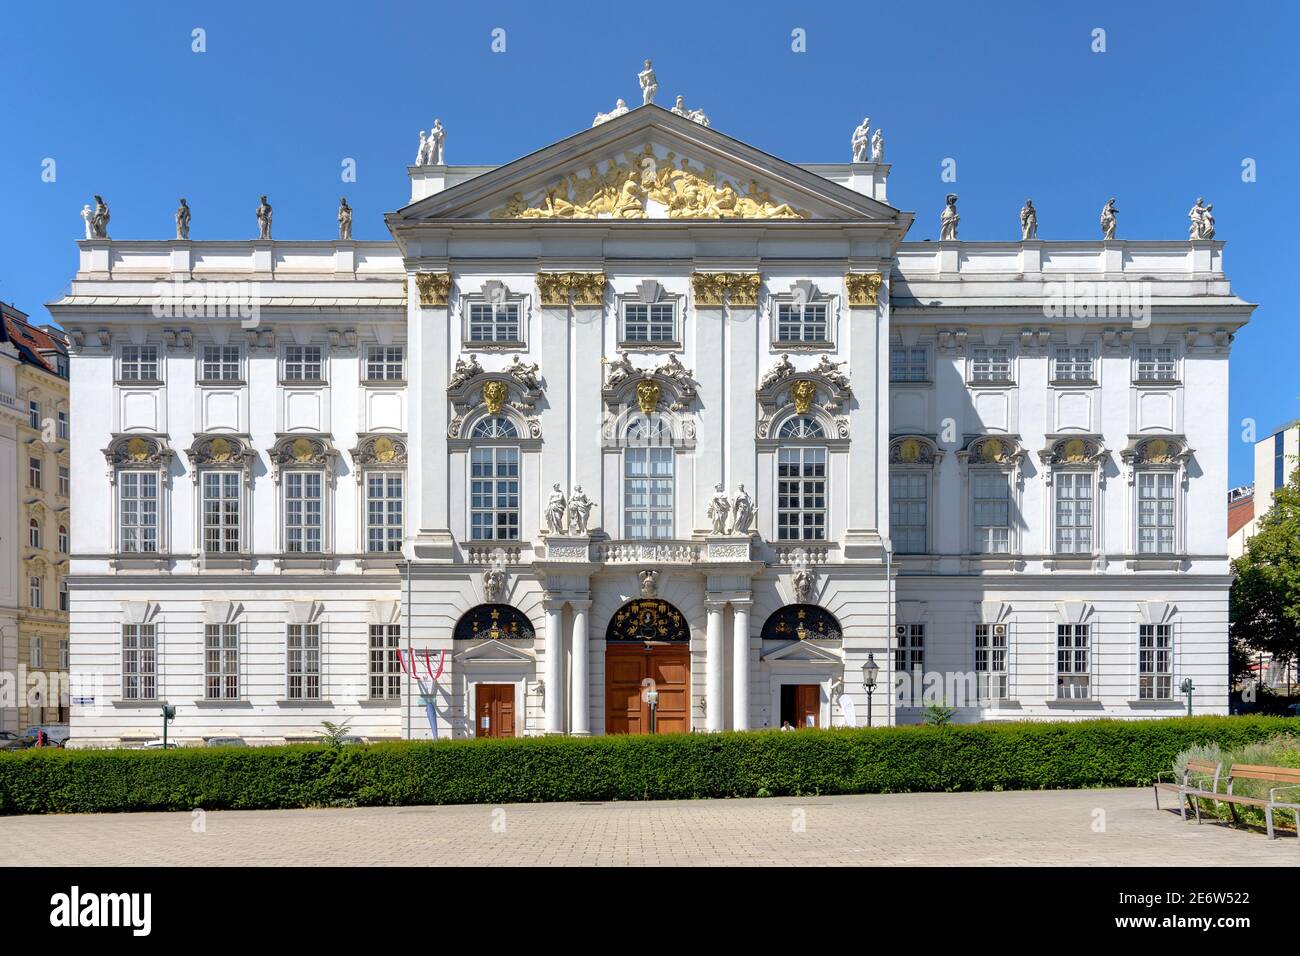 The Federal Ministry of Justice of Austria, located in the Trautson Palace in Vienna Stock Photo